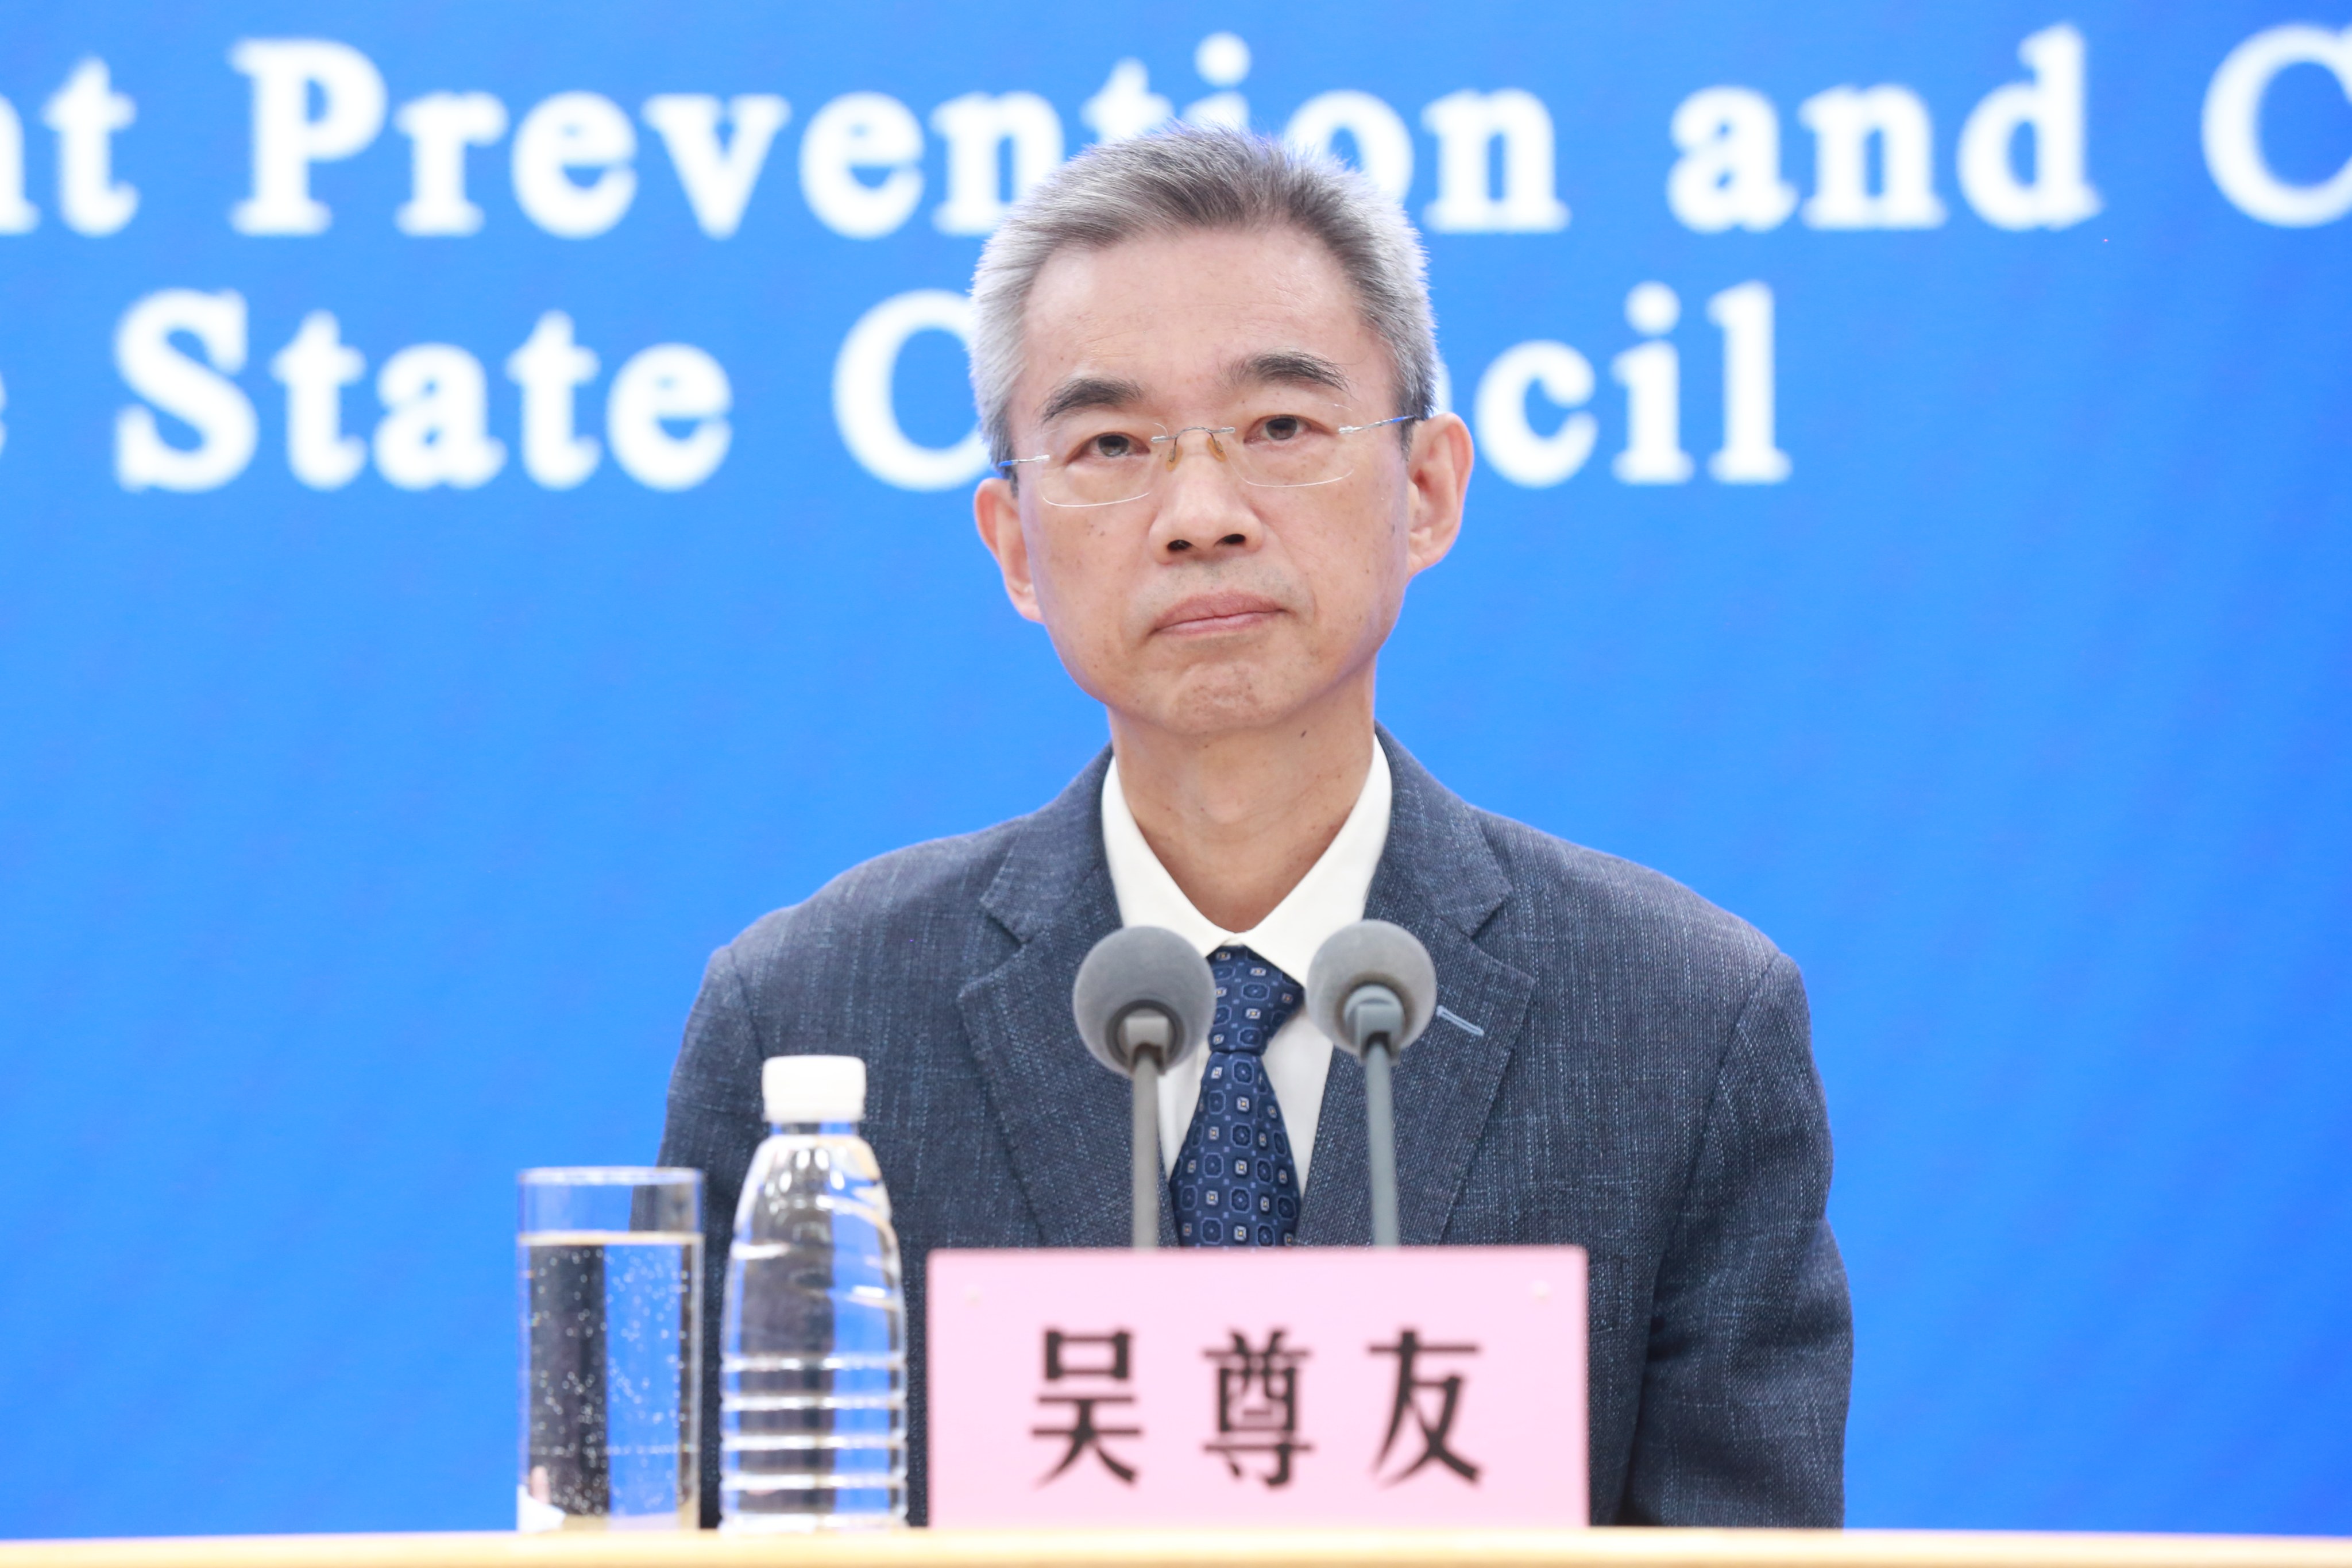 Wu Zunyou, chief epidemiologist at the Chinese Centre for Disease Control and Prevention, has revised his advice for monkeypox prevention. Photo: Getty Images